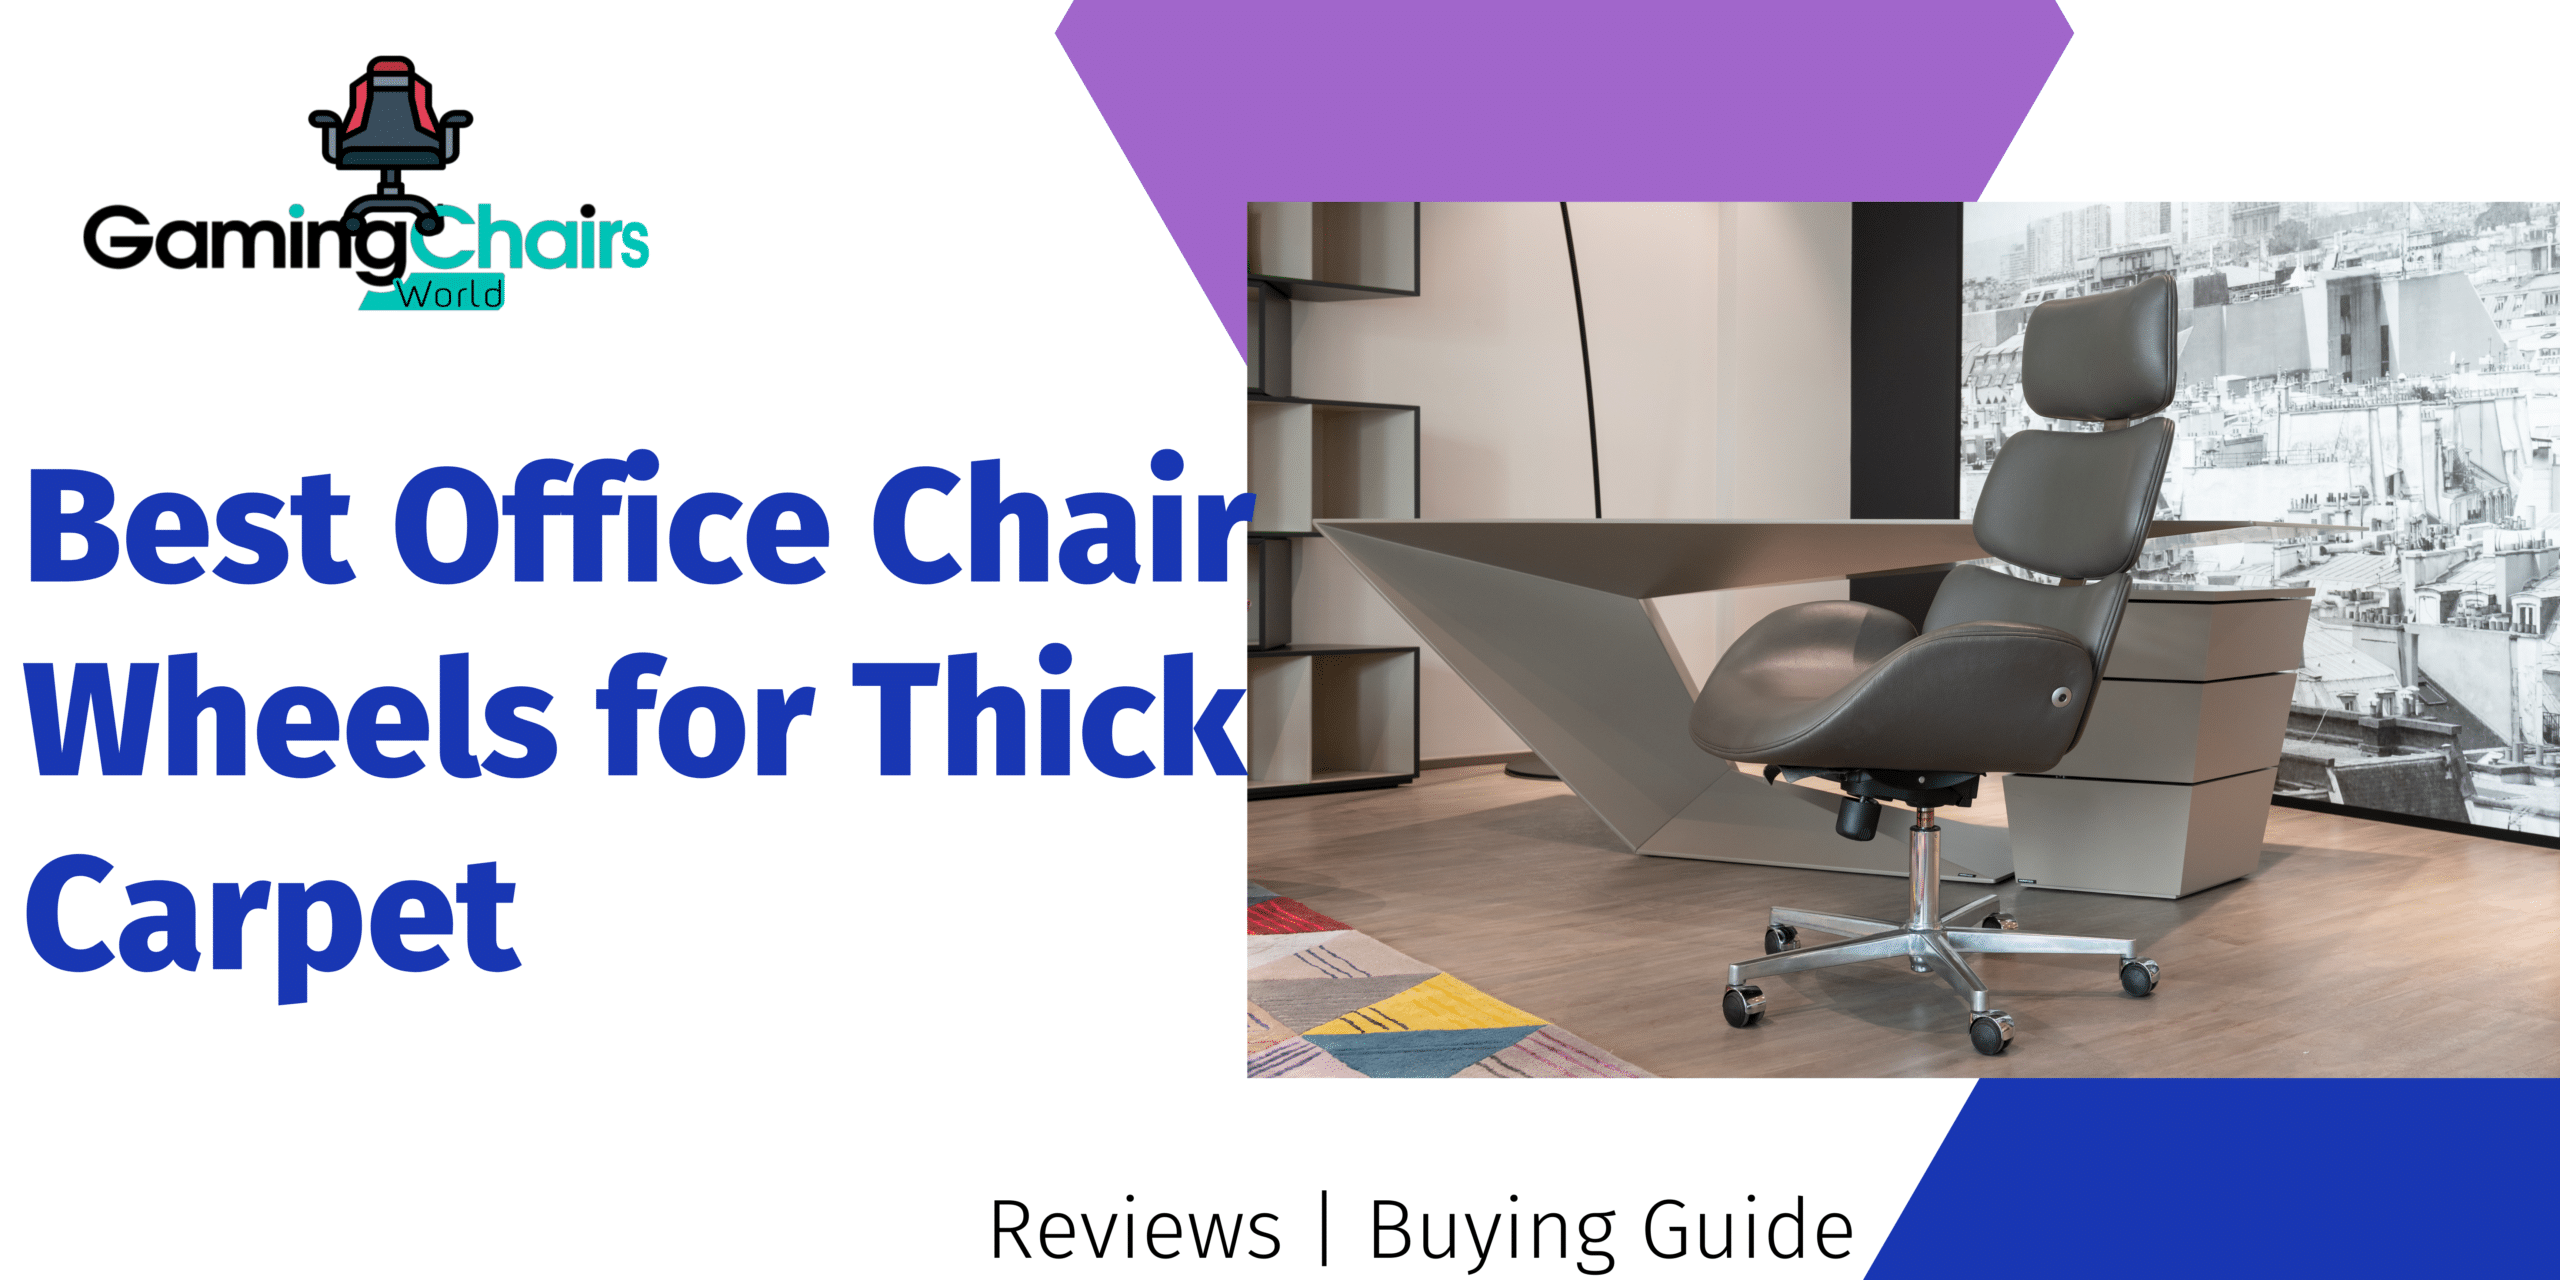 Top 6 Best Office Chair Wheels for Thick Carpet ( 2022 Review and Guide)